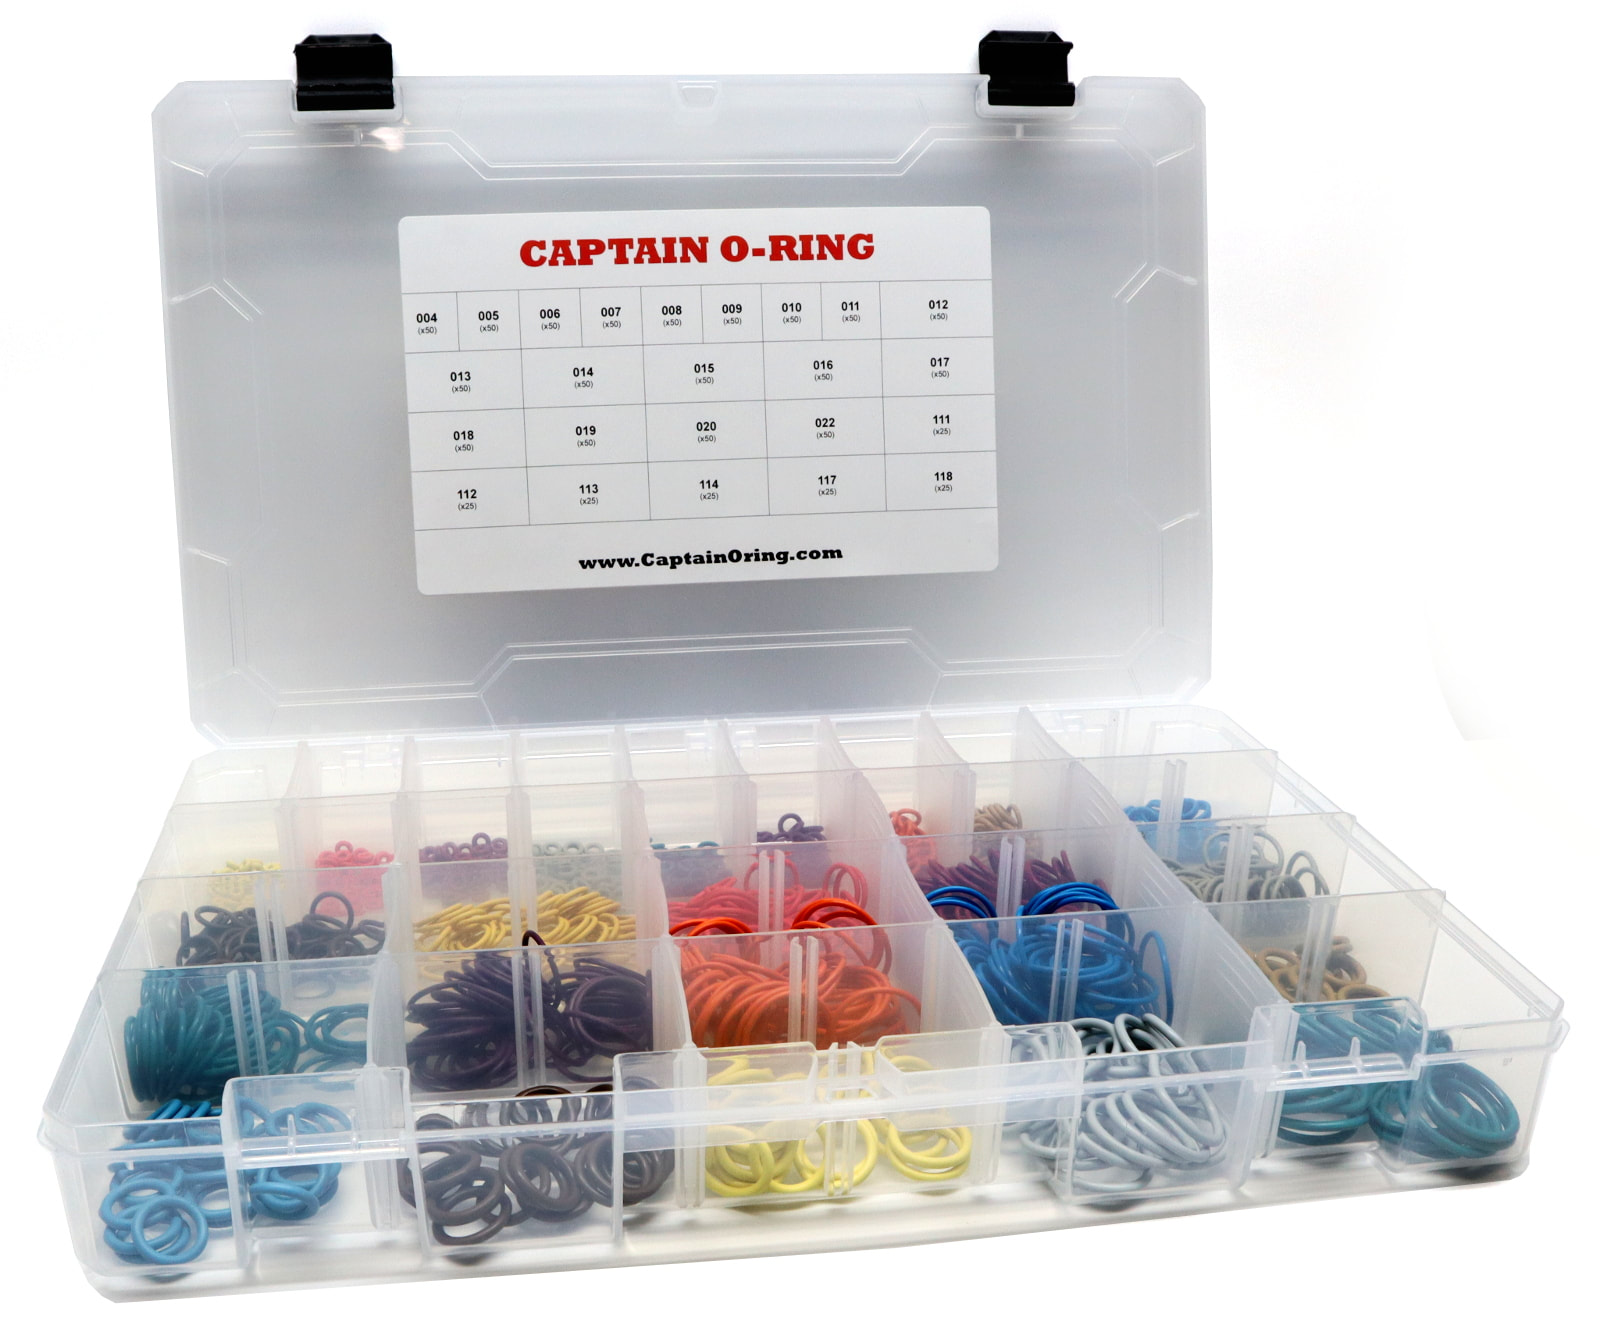 MASTER TECH Color Coded Paintball 1,050 Piece O-Ring Box Kit - Necessity  for all stores, fields, techs!